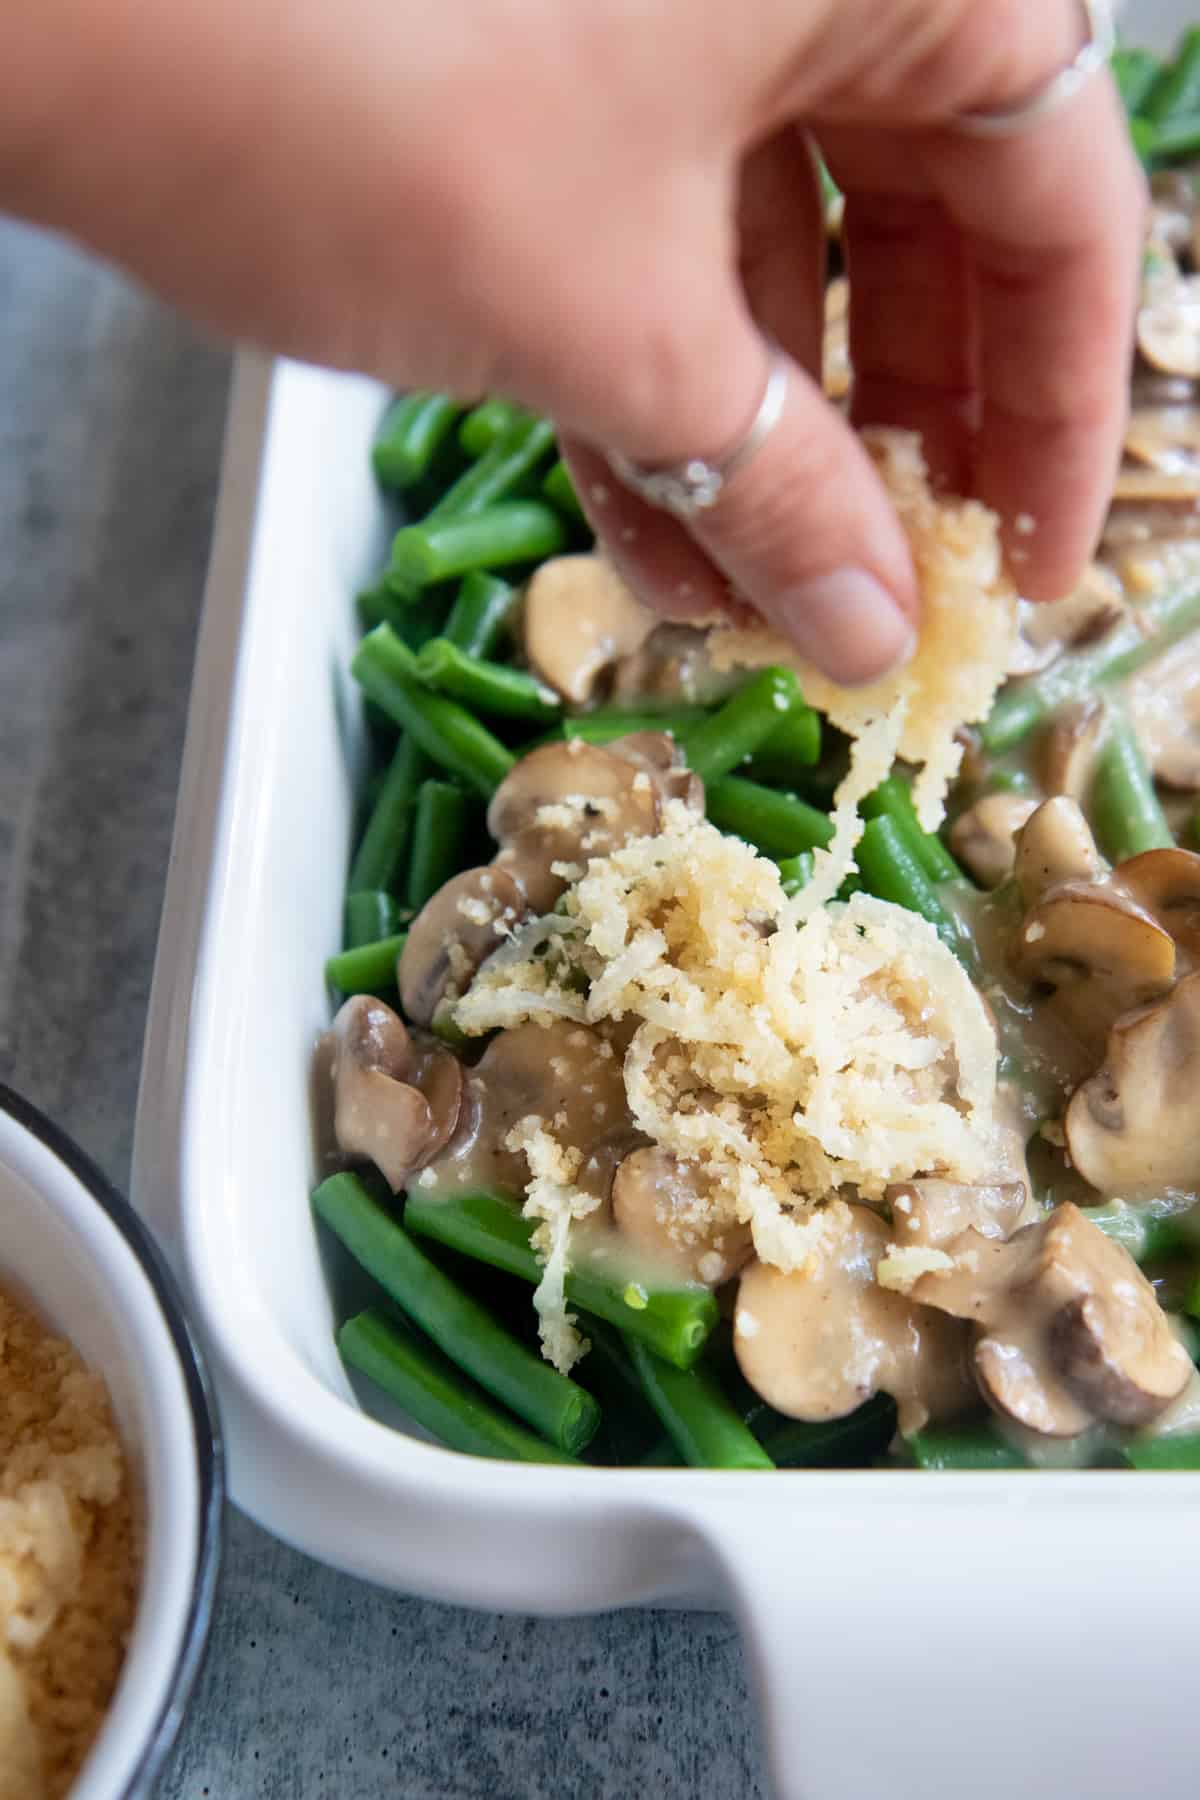 A hand sprinkles Crispy Parmesan Onions over the top of a baking dish of green beans and mushroom sauce.